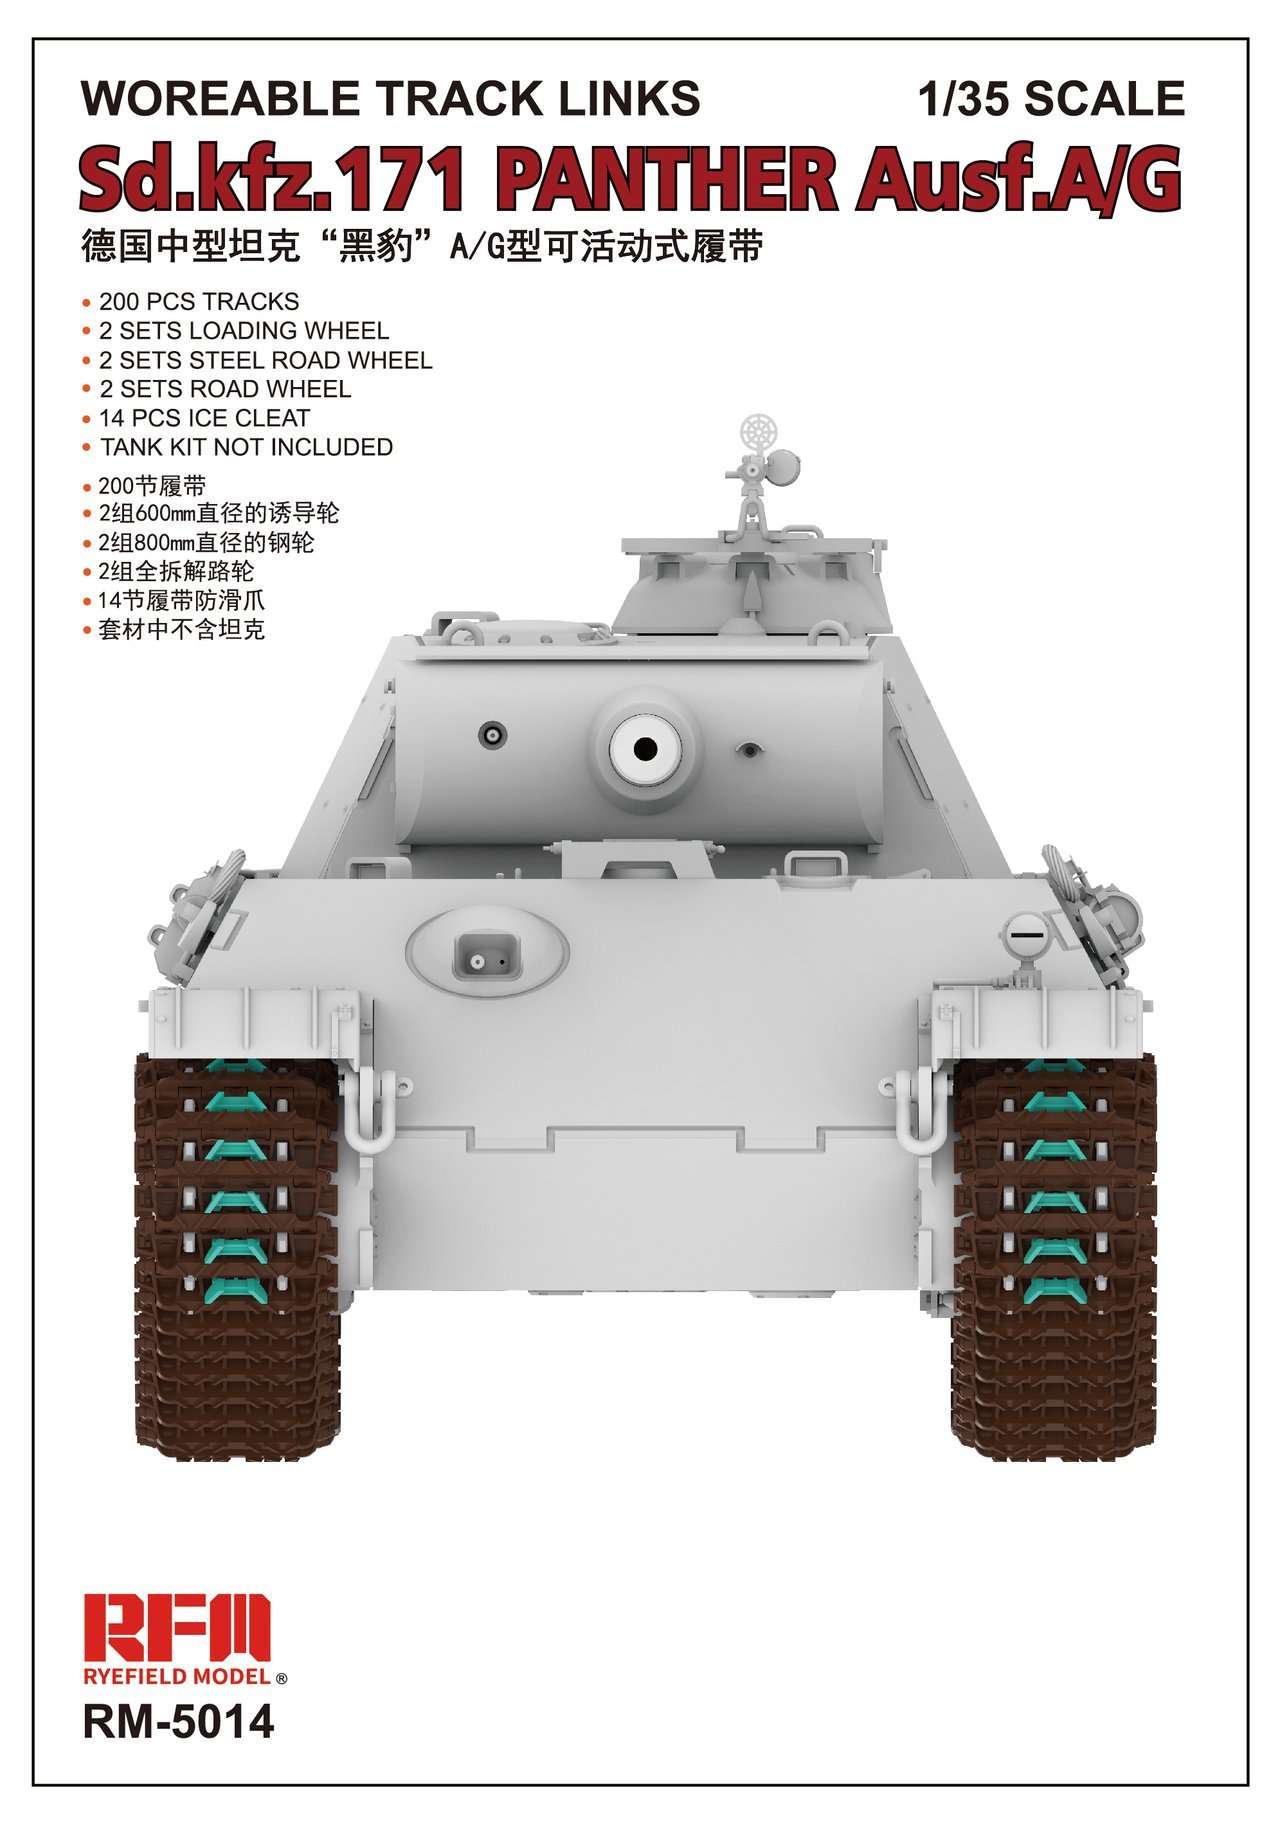 1/35 Workable Tracks for Sd.Kfz.171 Panther Ausf.A/G - Click Image to Close